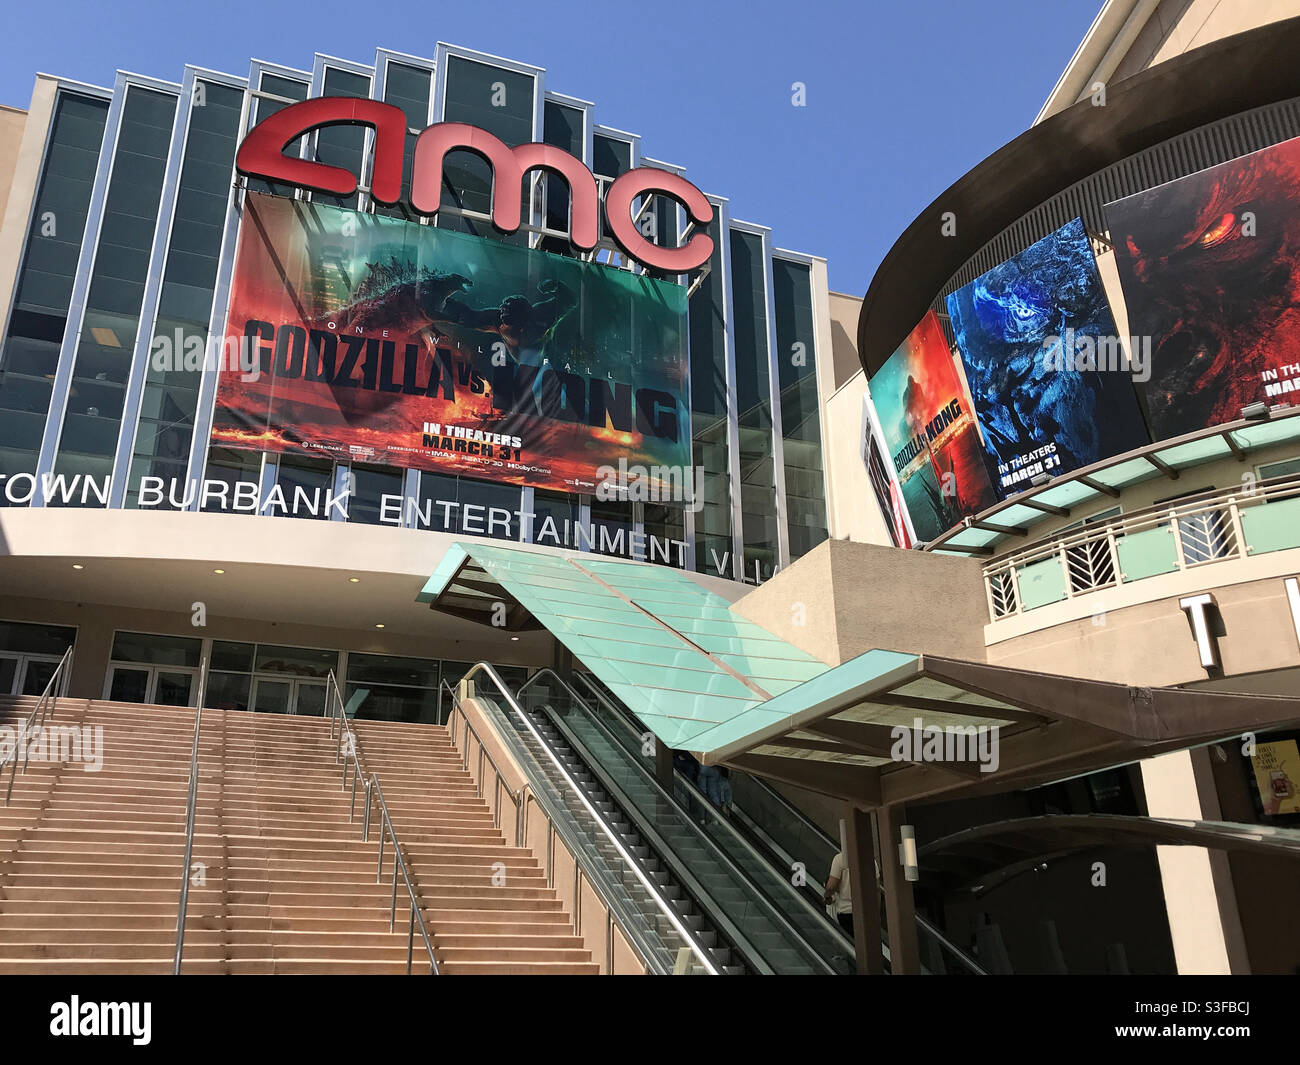 Burbank, CA / USA - March 28, 2021: An AMC movie theater, located in the Downtown Burbank Entertainment Village, is shown promoting Godzilla vs. Kong. The chain recently opened with limited capacity. Stock Photo